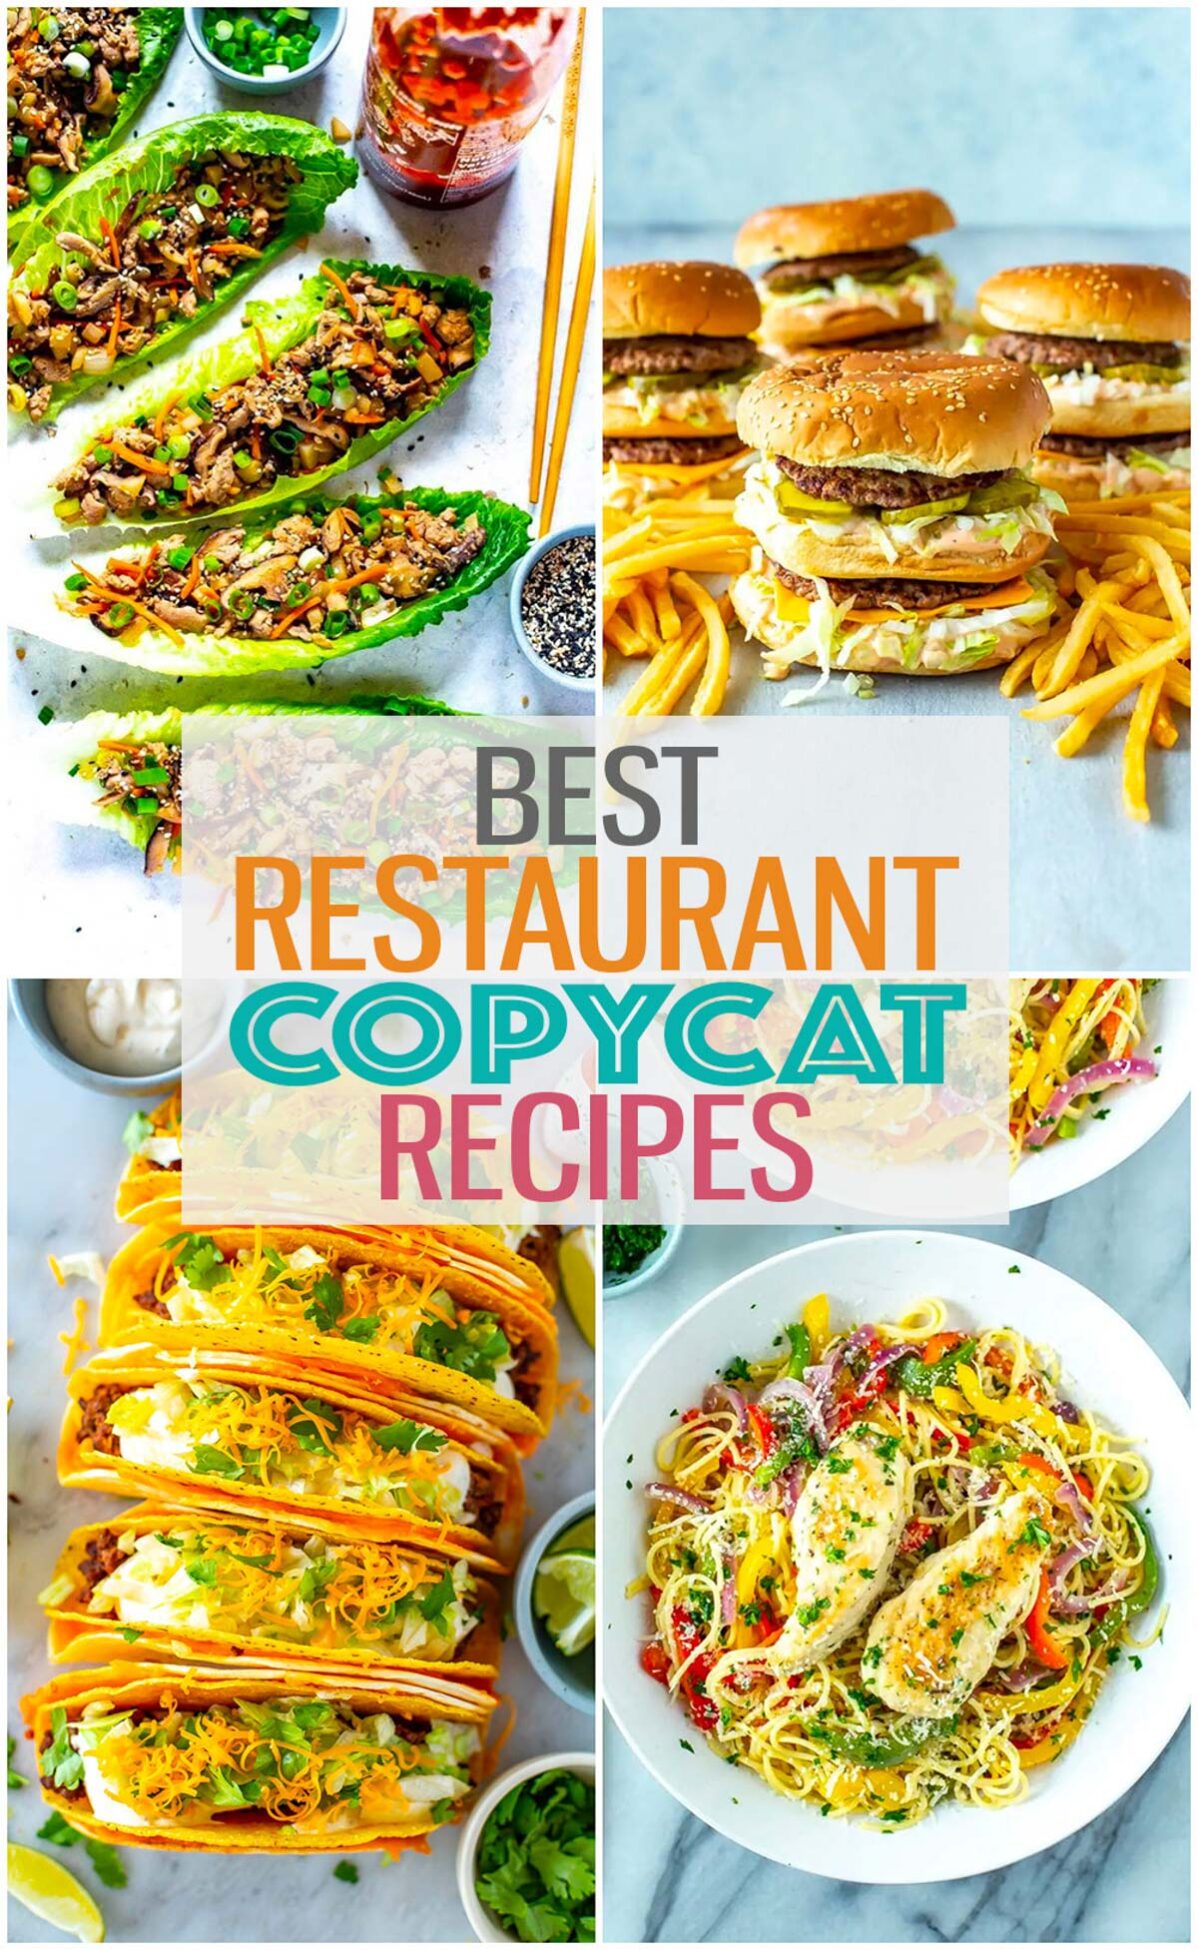 A collage of 4 different restaurant copycats with the text "Best Restaurant Copycat Recipes" layered over top. 